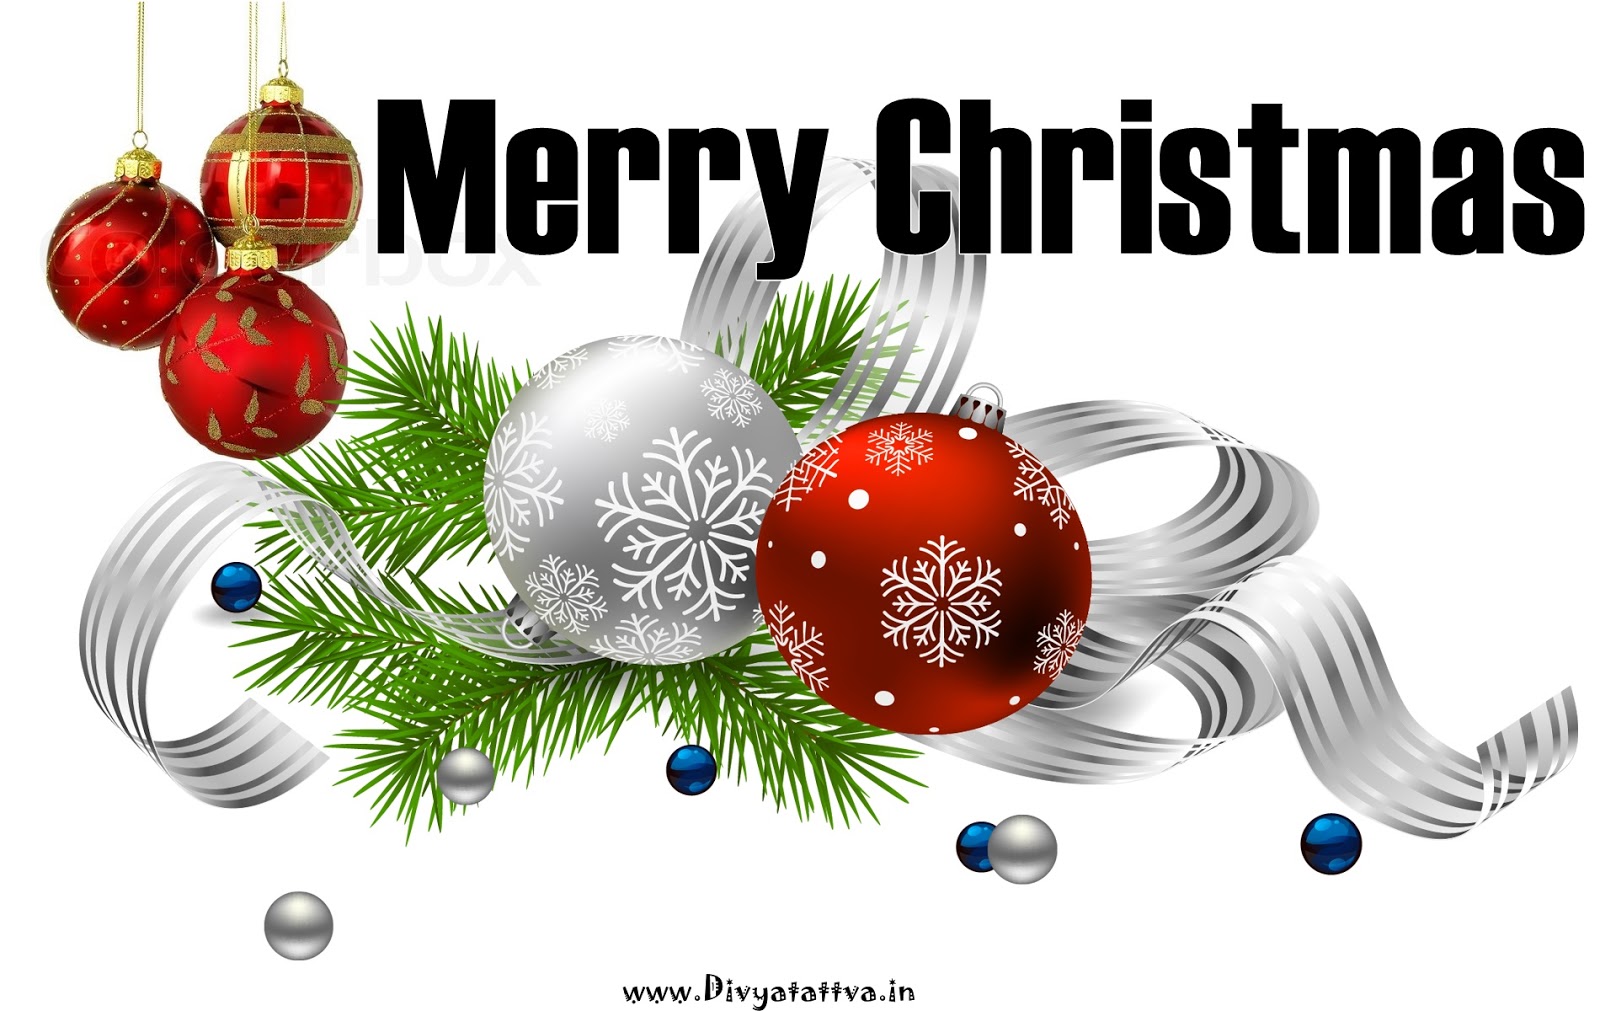 Merry Christmas Free HD Wallpapers  Let Us Publish